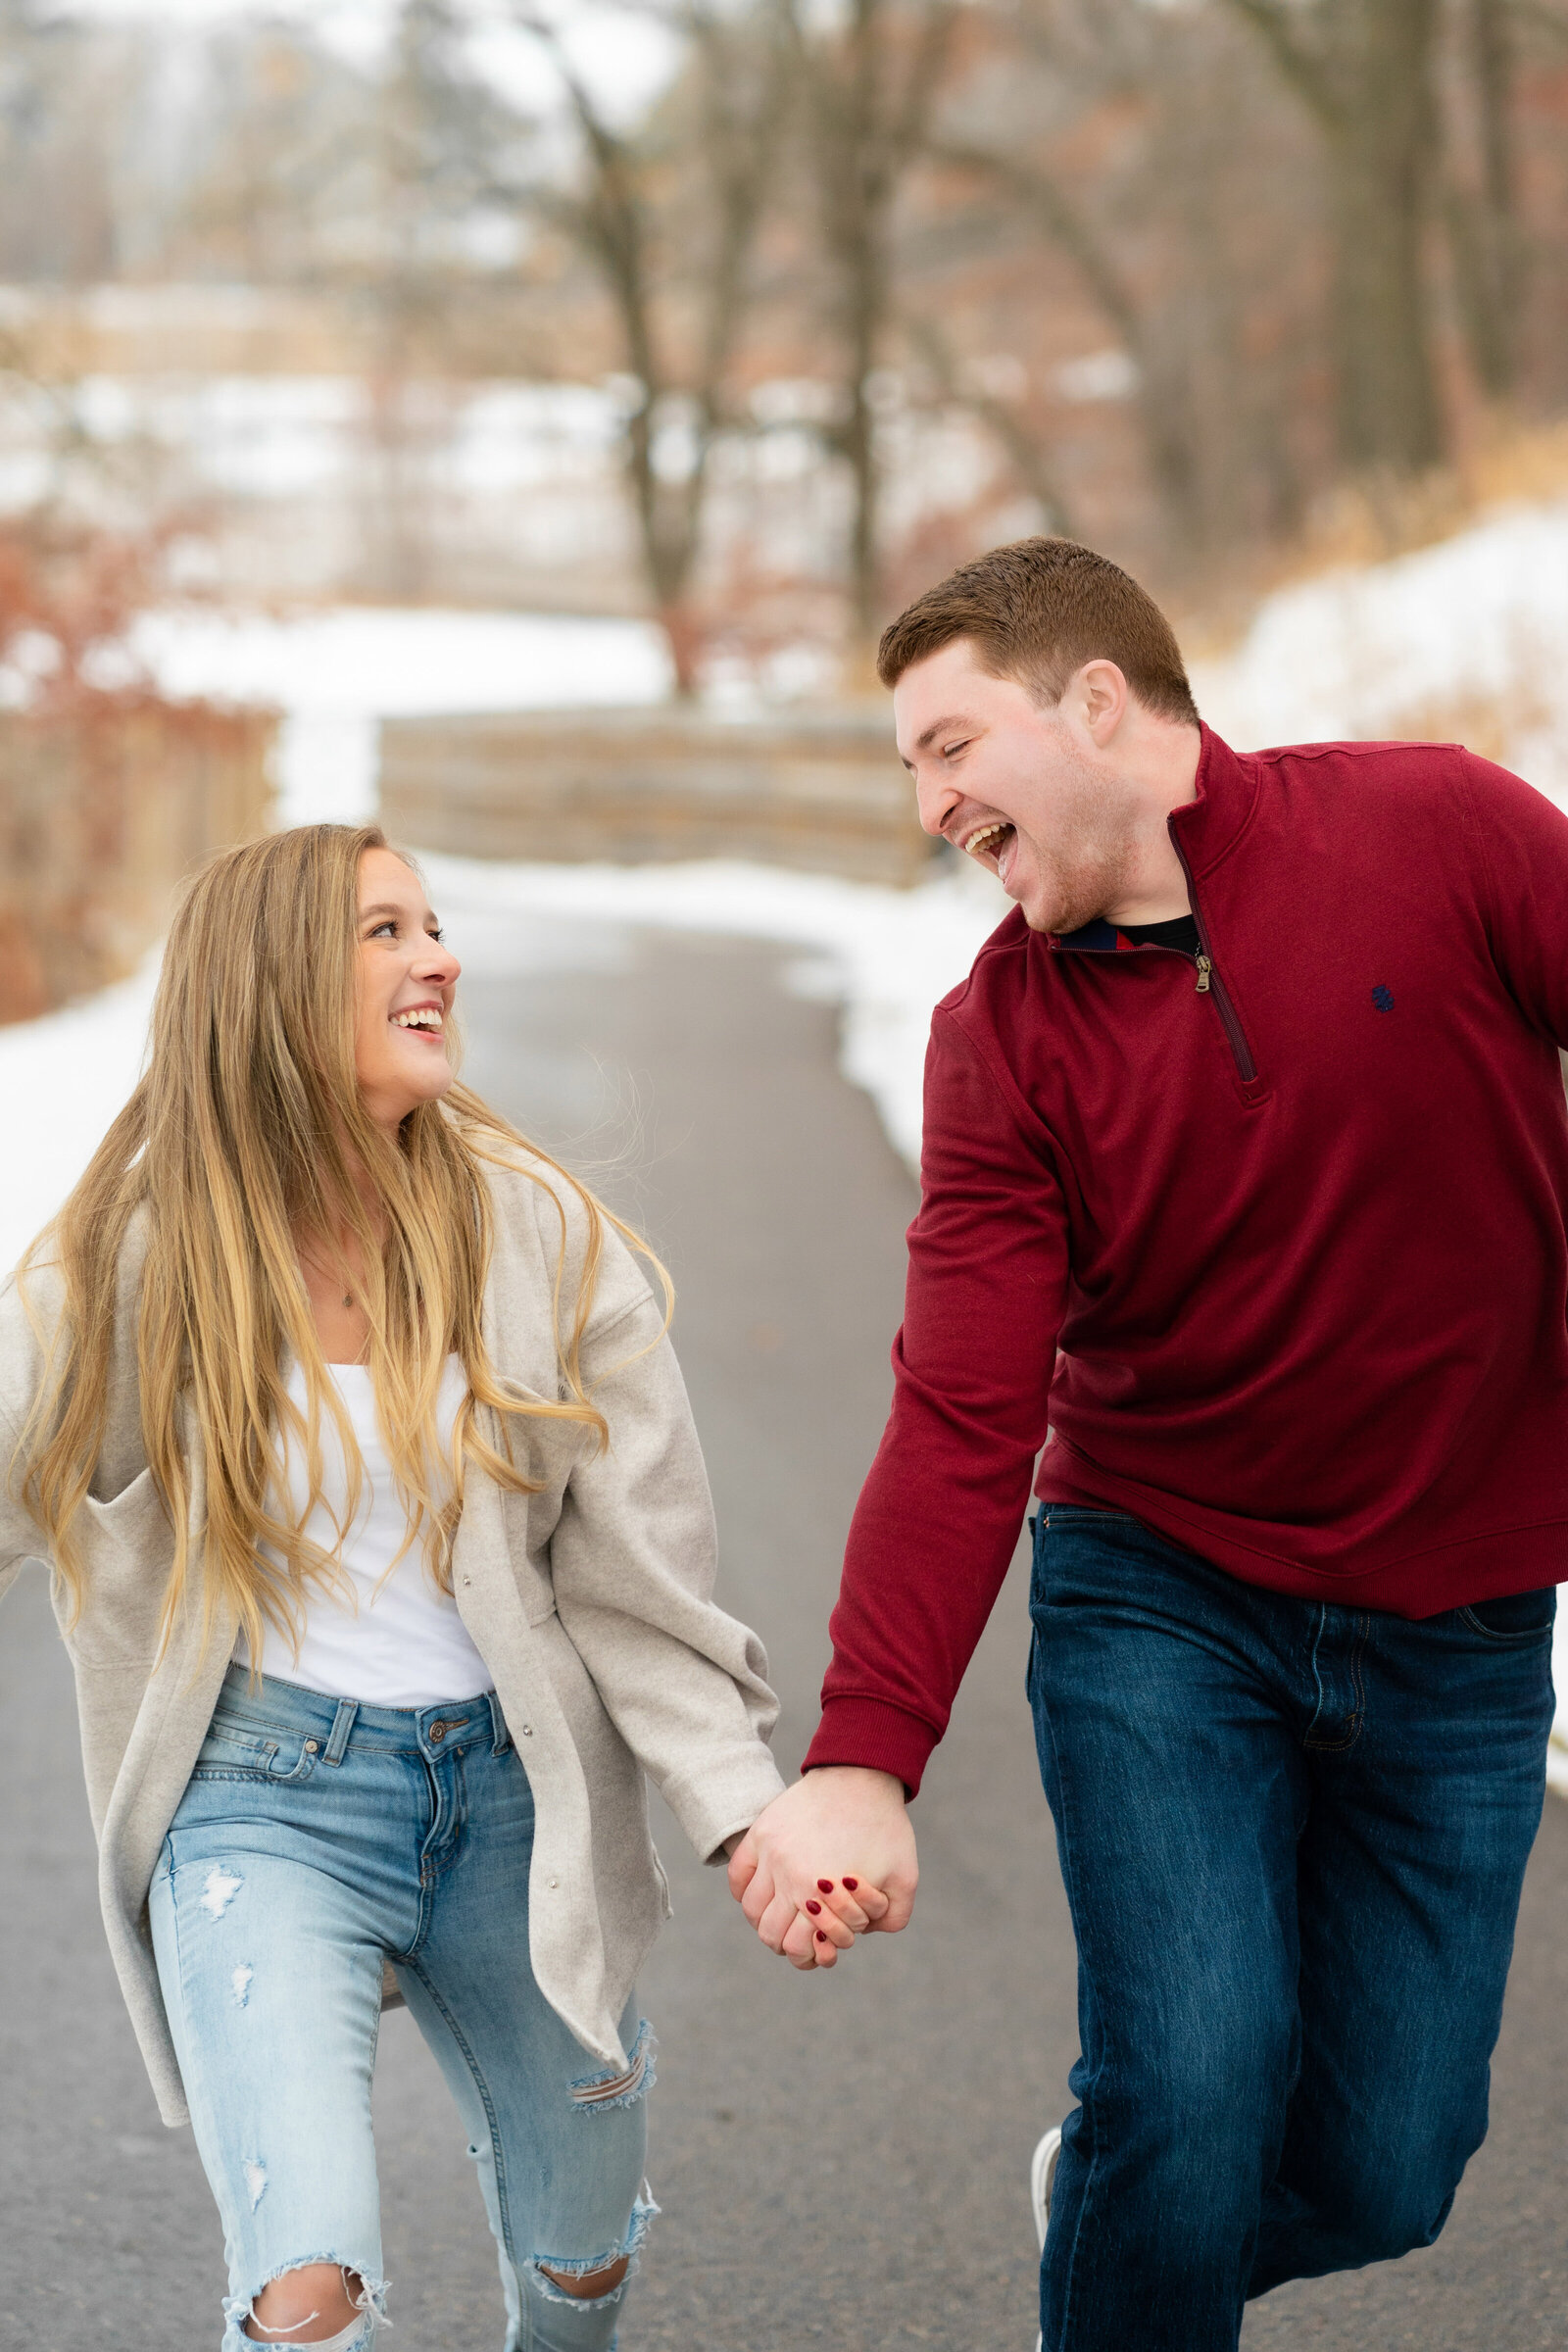 Man and woman in sweaters and jeans laugh while holding hands in the snow.